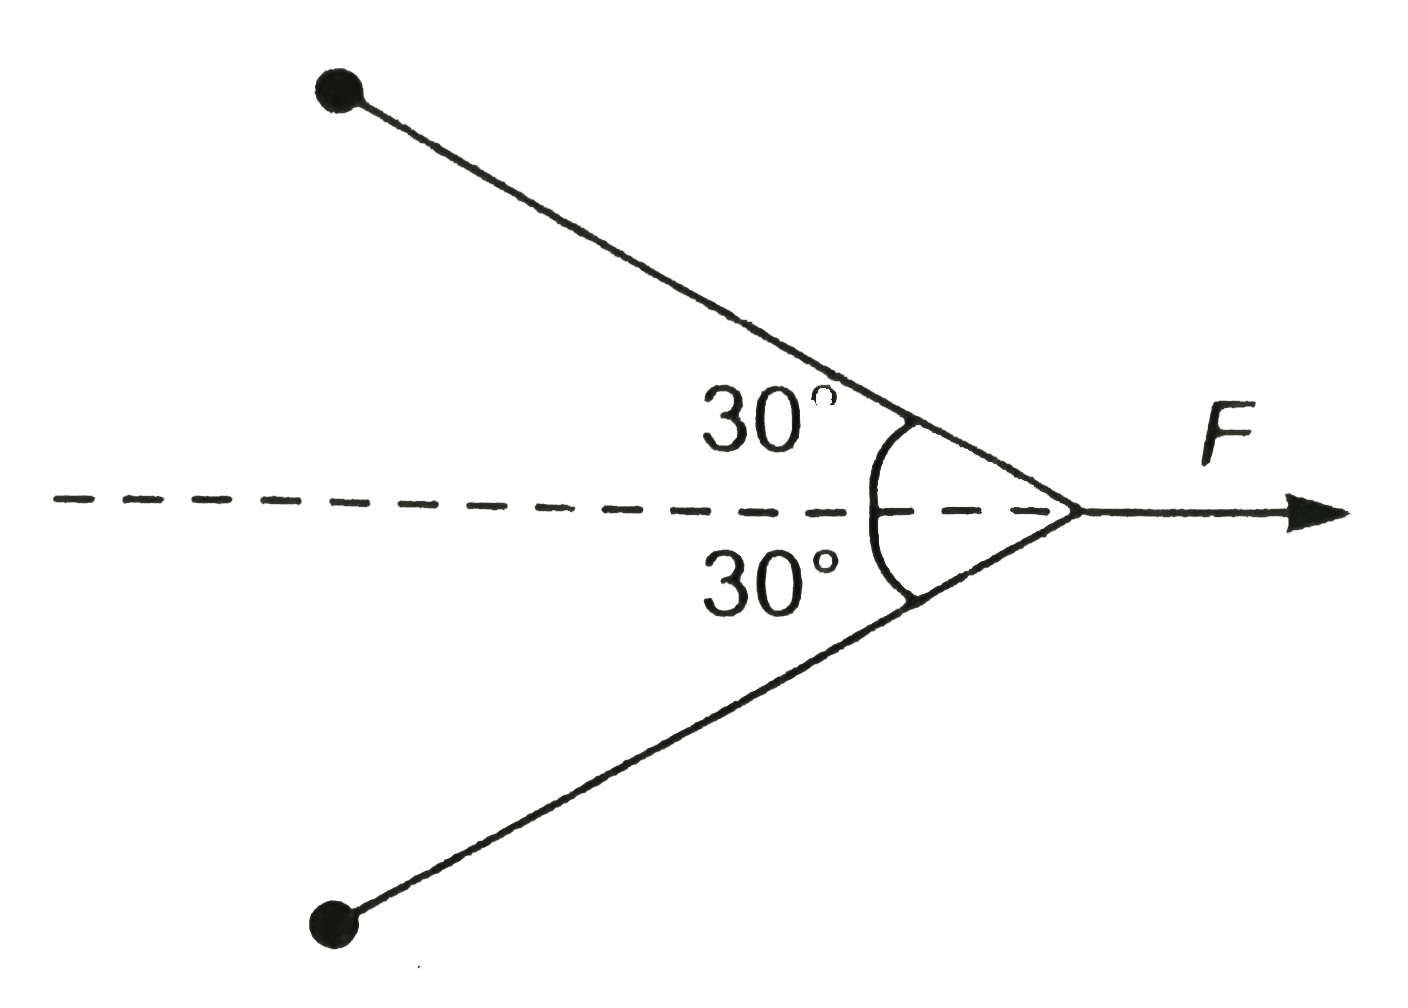 In figure two identical particals each of mass m are tied together with an inextensible string. This is pulled at its centre wwith a constant force F. If the whole system lines on a smooth horizontal plane, then the aceleration of each partical towards each other is